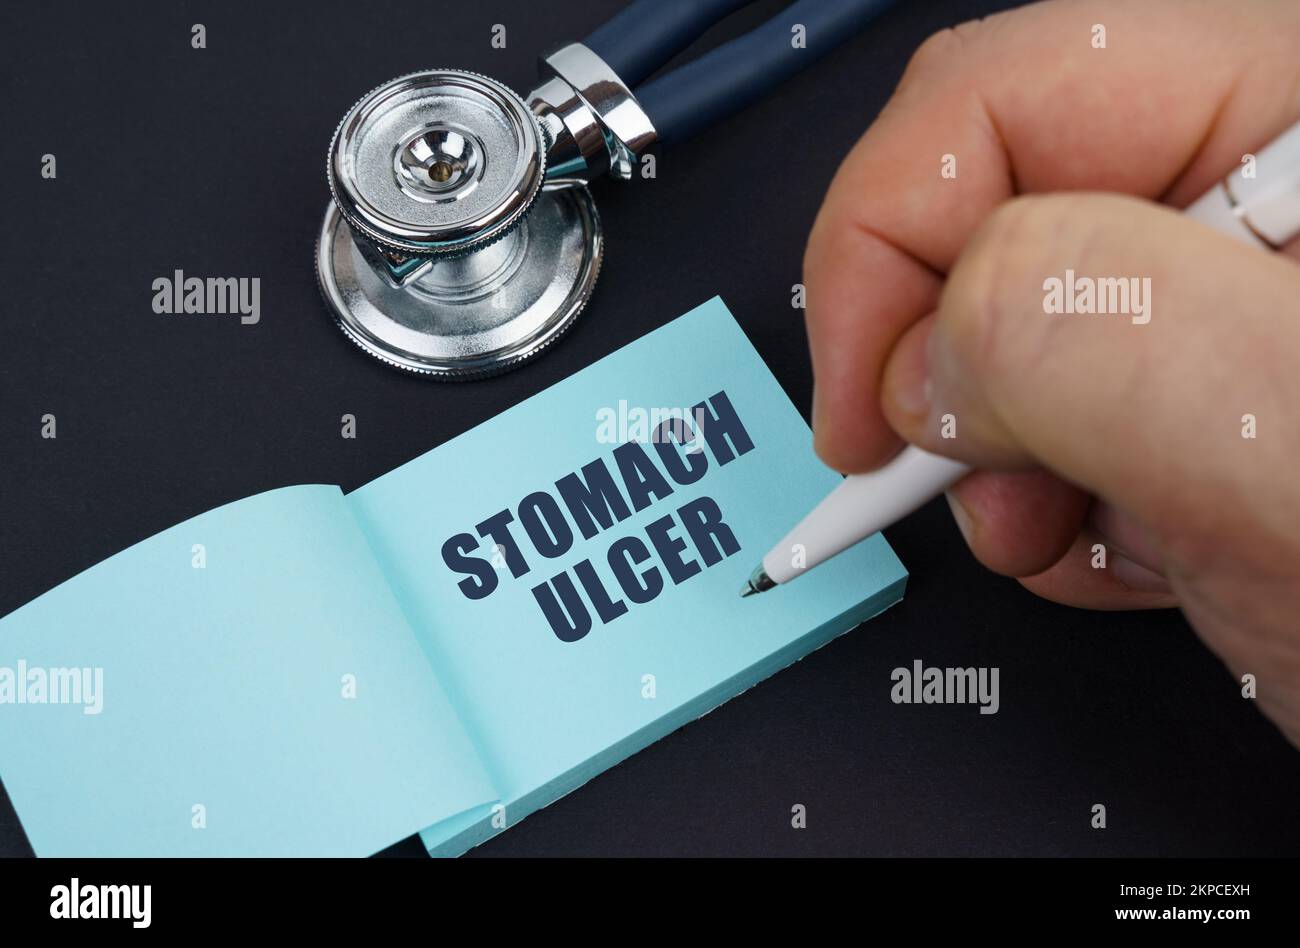 Medicine and health concept. On a black table is a stethoscope and a notebook in which the man wrote - STOMACH ULCER Stock Photo